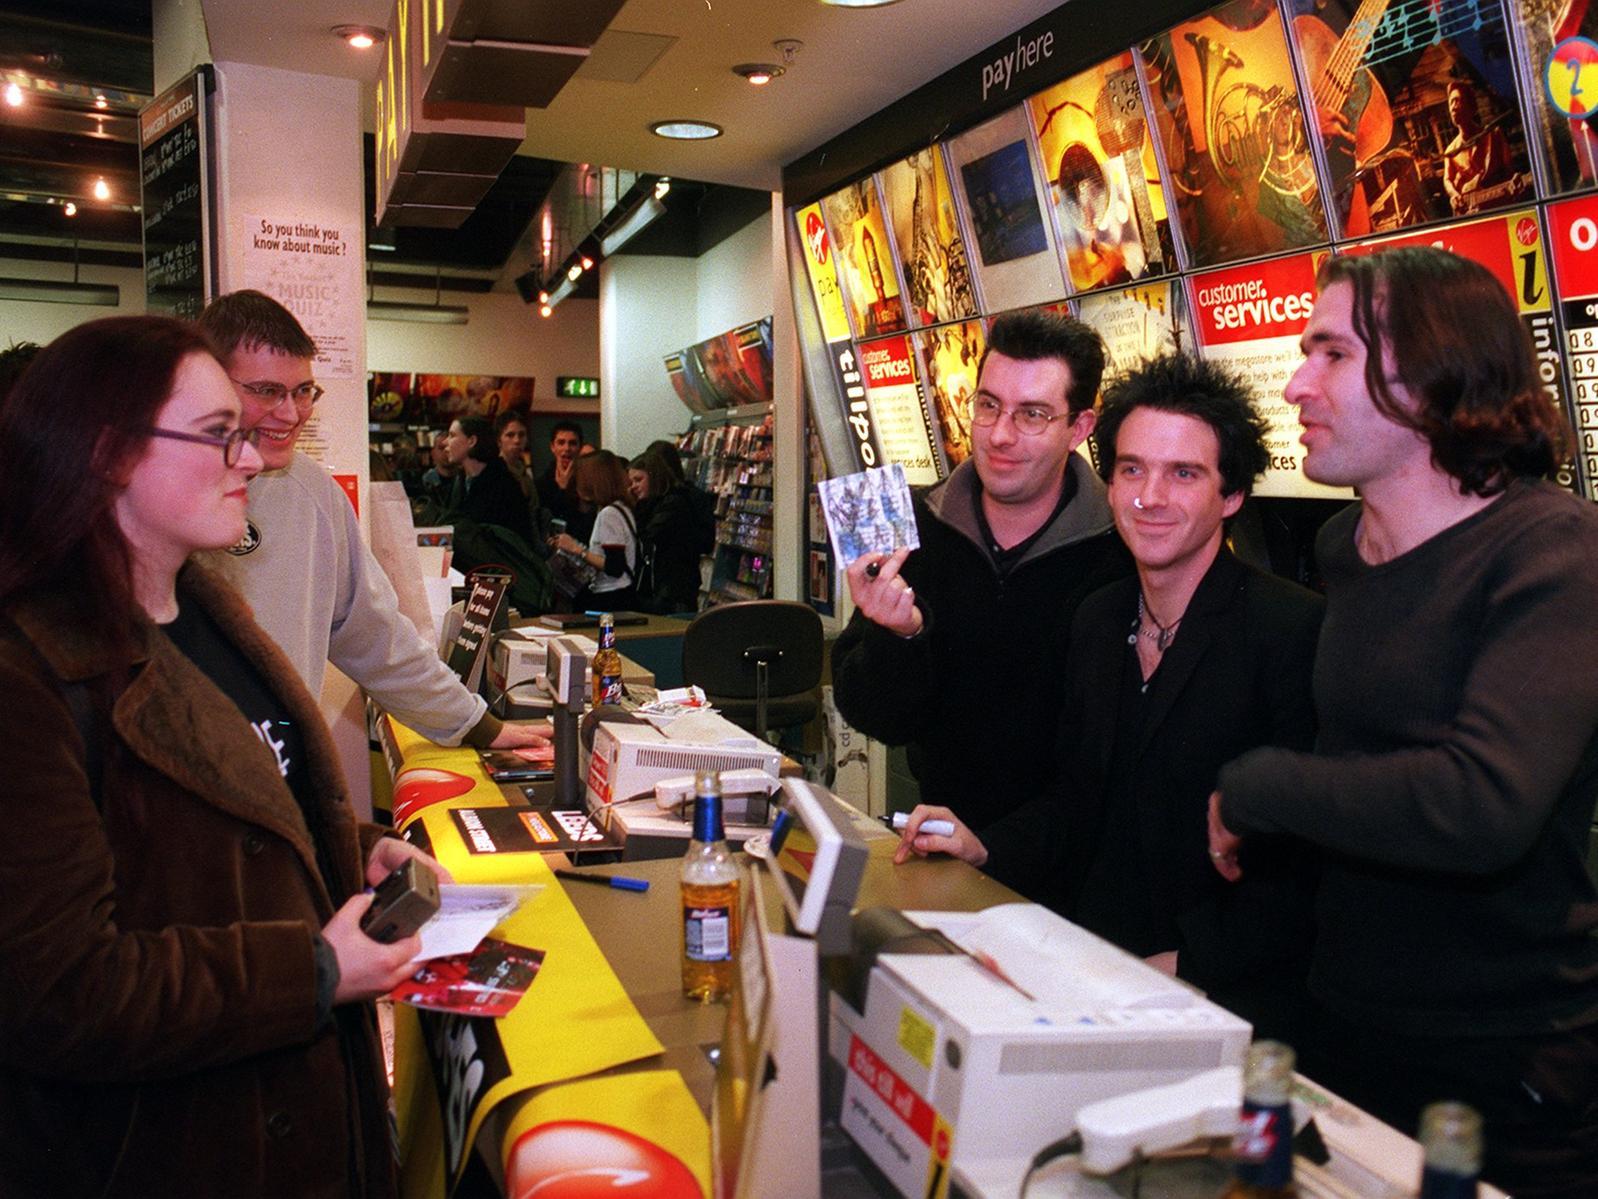 Members of rock band 3 Colours Red were at the Virgin Megastore on Albion Street. Pictured from left are Ben Hardman, Chris McCormack and Keith Baxter.